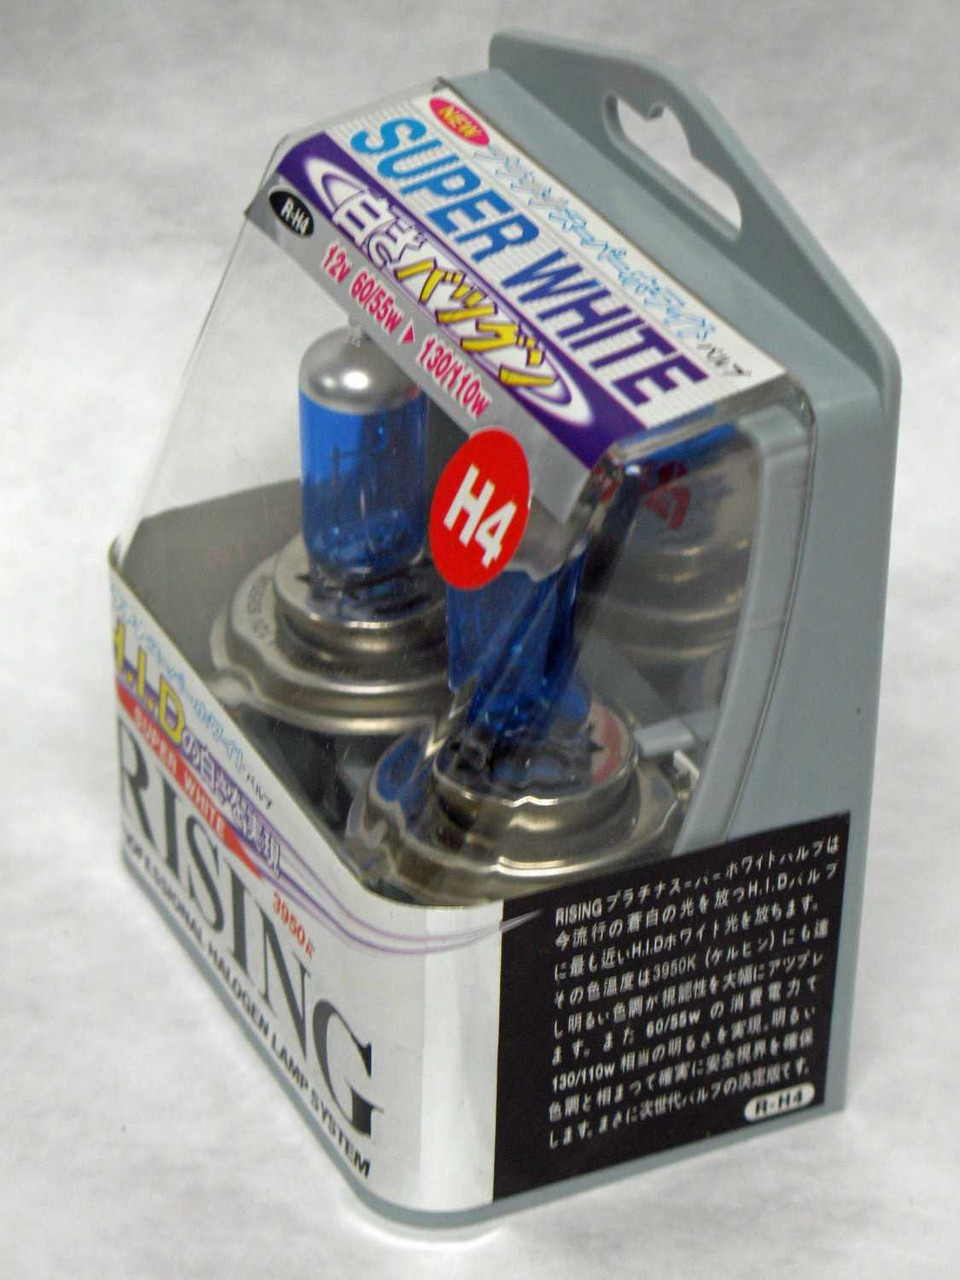 H4 Rising Super White 3950K 60/55W Halogen Replacement Light Bulb Set of 2 from Japan